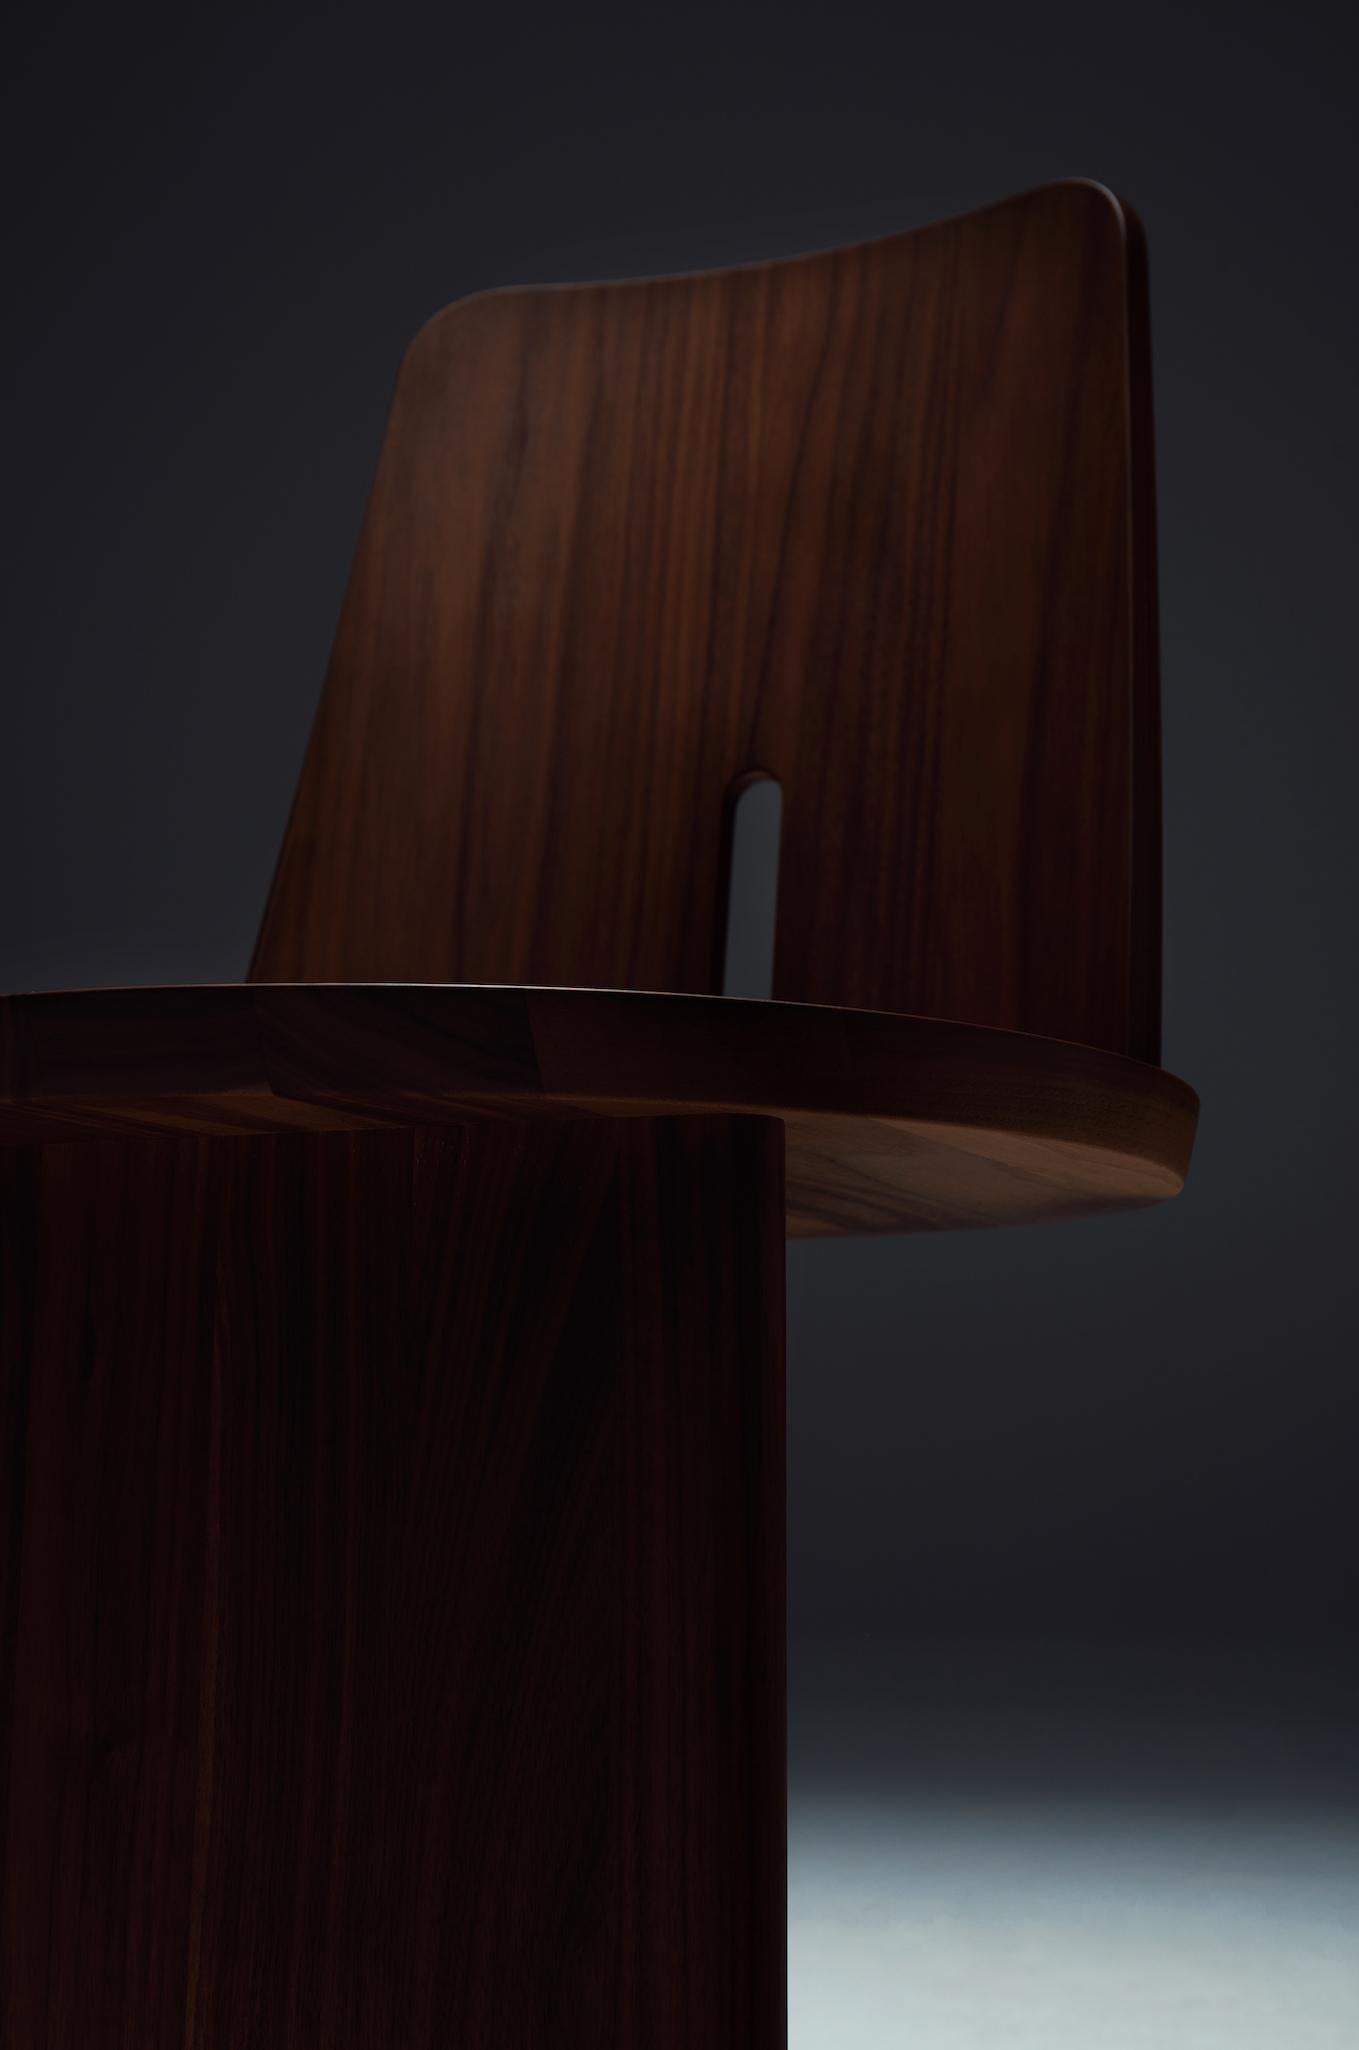 Italian La Manufacture-Paris Intersection Canaletto Walnut Chair Designed by Neri & Hu For Sale